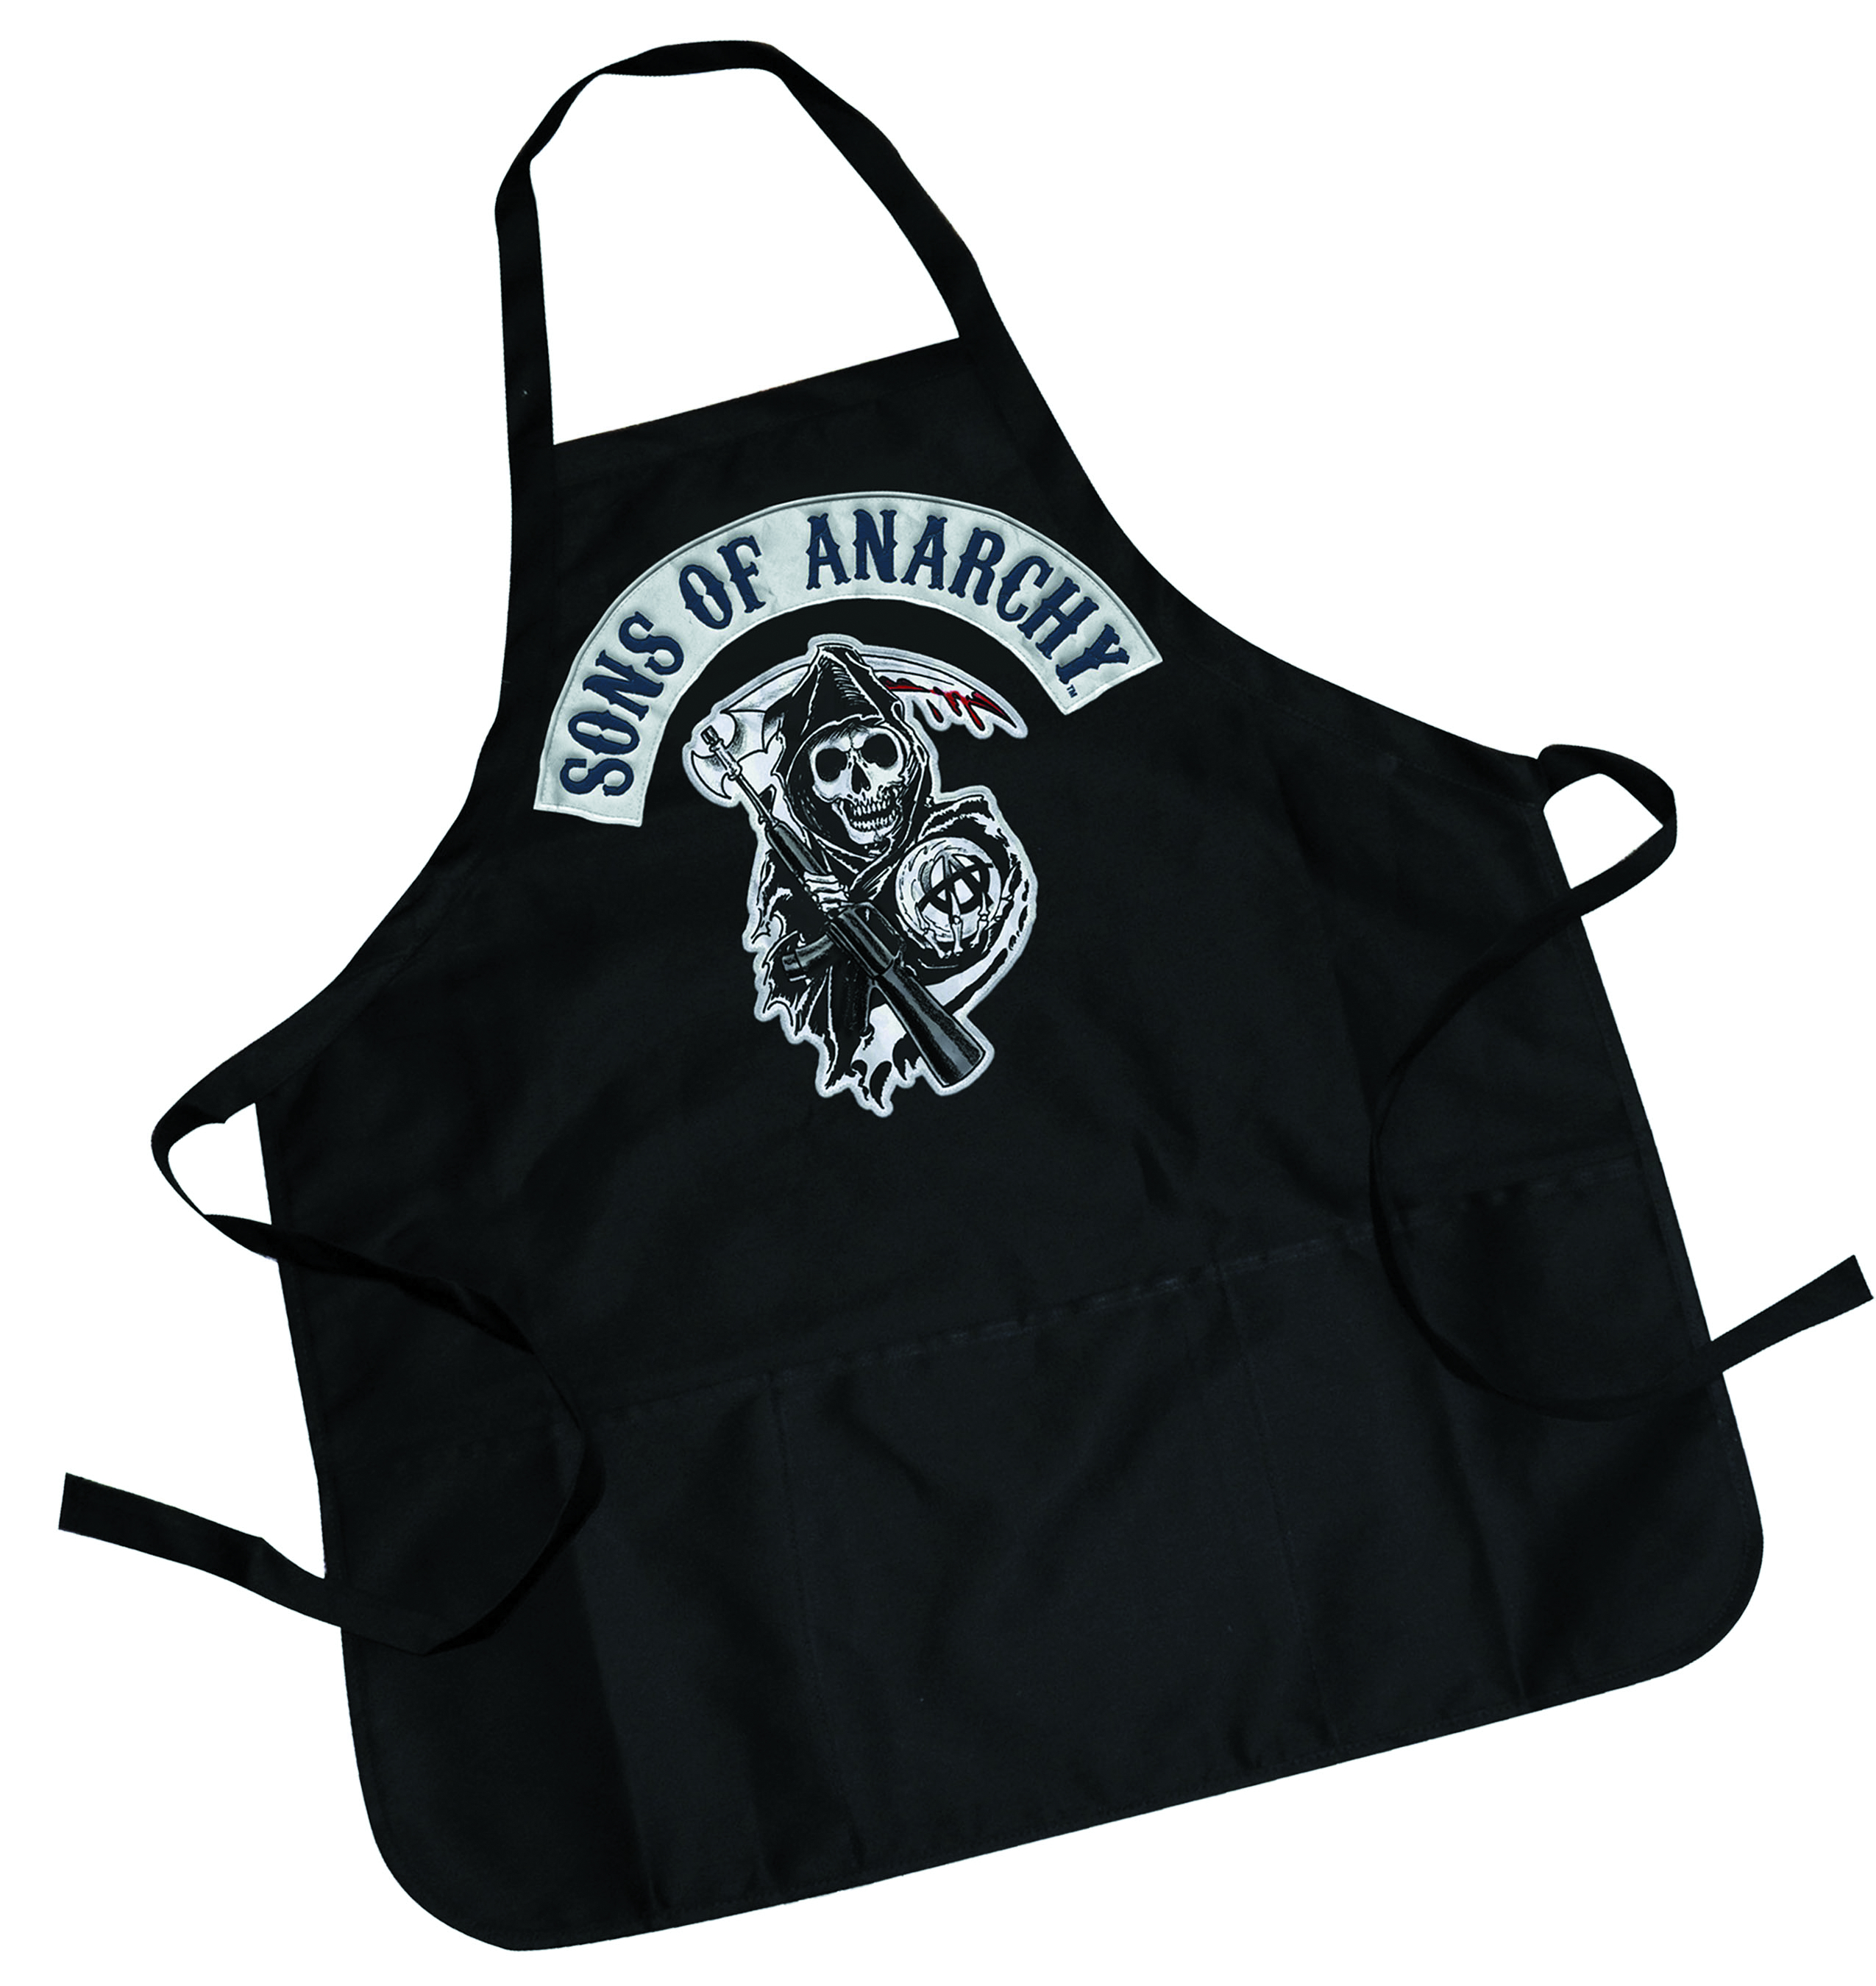 SEP142563 - SONS OF ANARCHY LOGO APRON - Previews World2550 x 2700